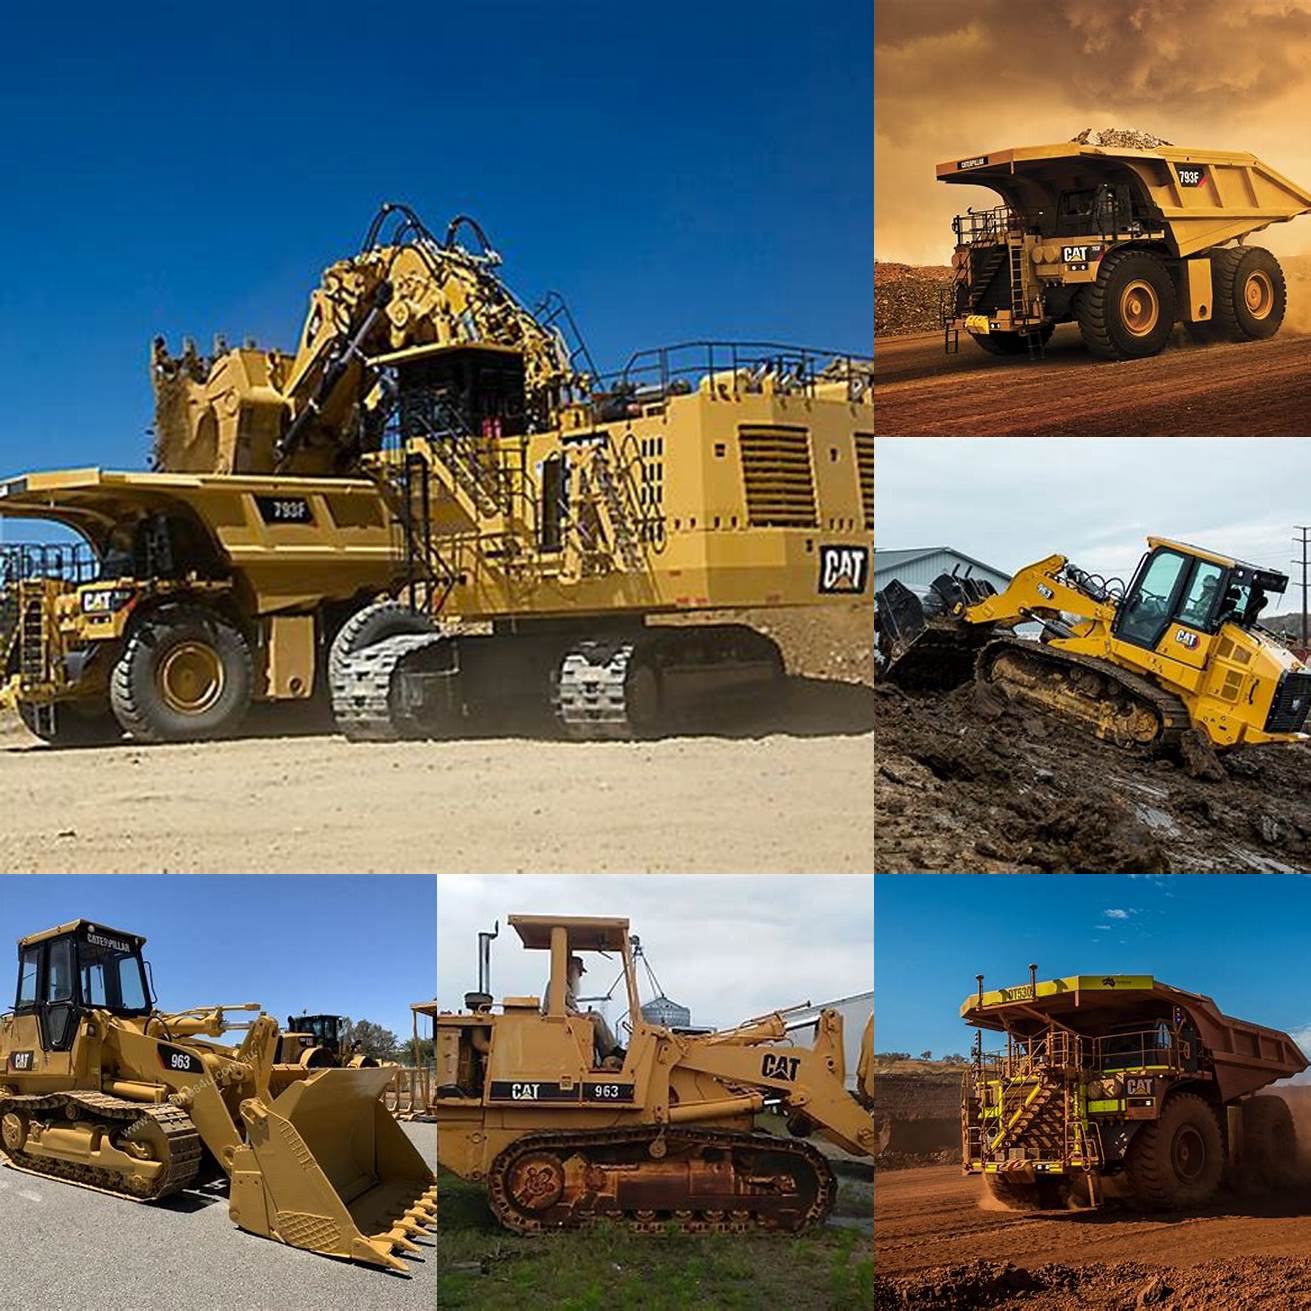 Mining - The Cat 963 is also commonly used in the mining industry Its ability to move heavy loads quickly and efficiently makes it an ideal choice for mining operations